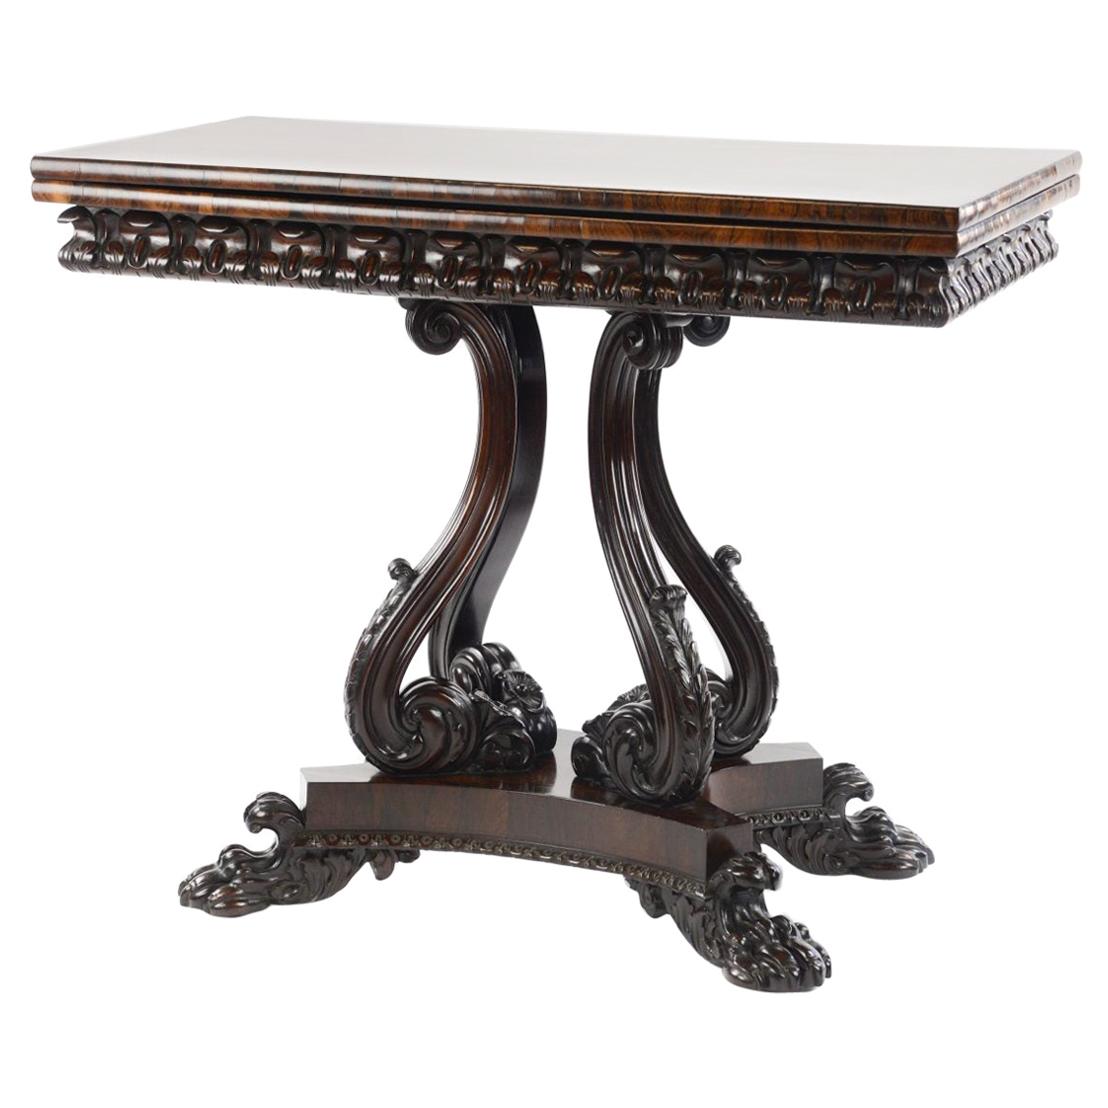 Fine Quality William IV Rosewood Card Table, Attributed to Gillows